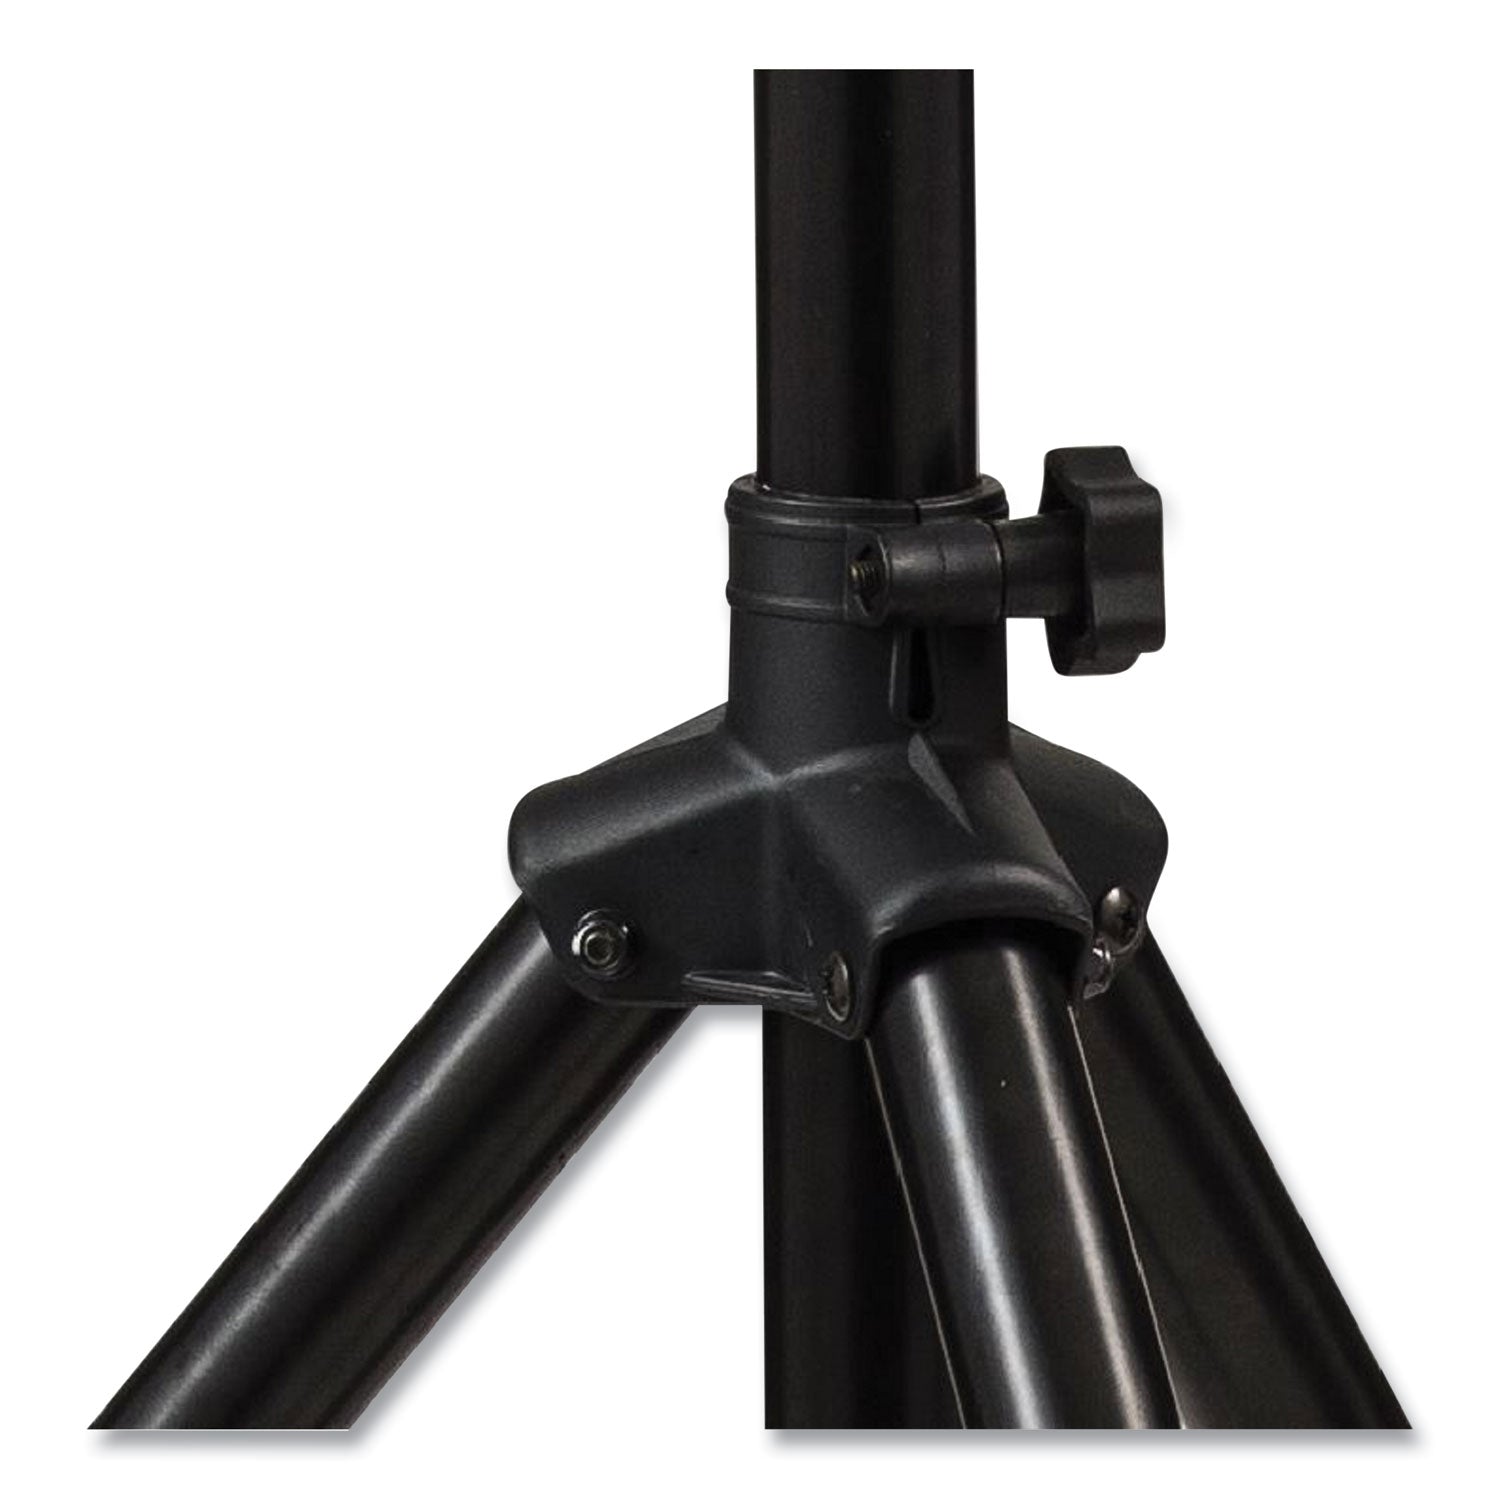 aluminum-tripod-for-pra-series-pa-systems-aluminum-43-to-69-ships-in-1-3-business-days_npspratrd - 2